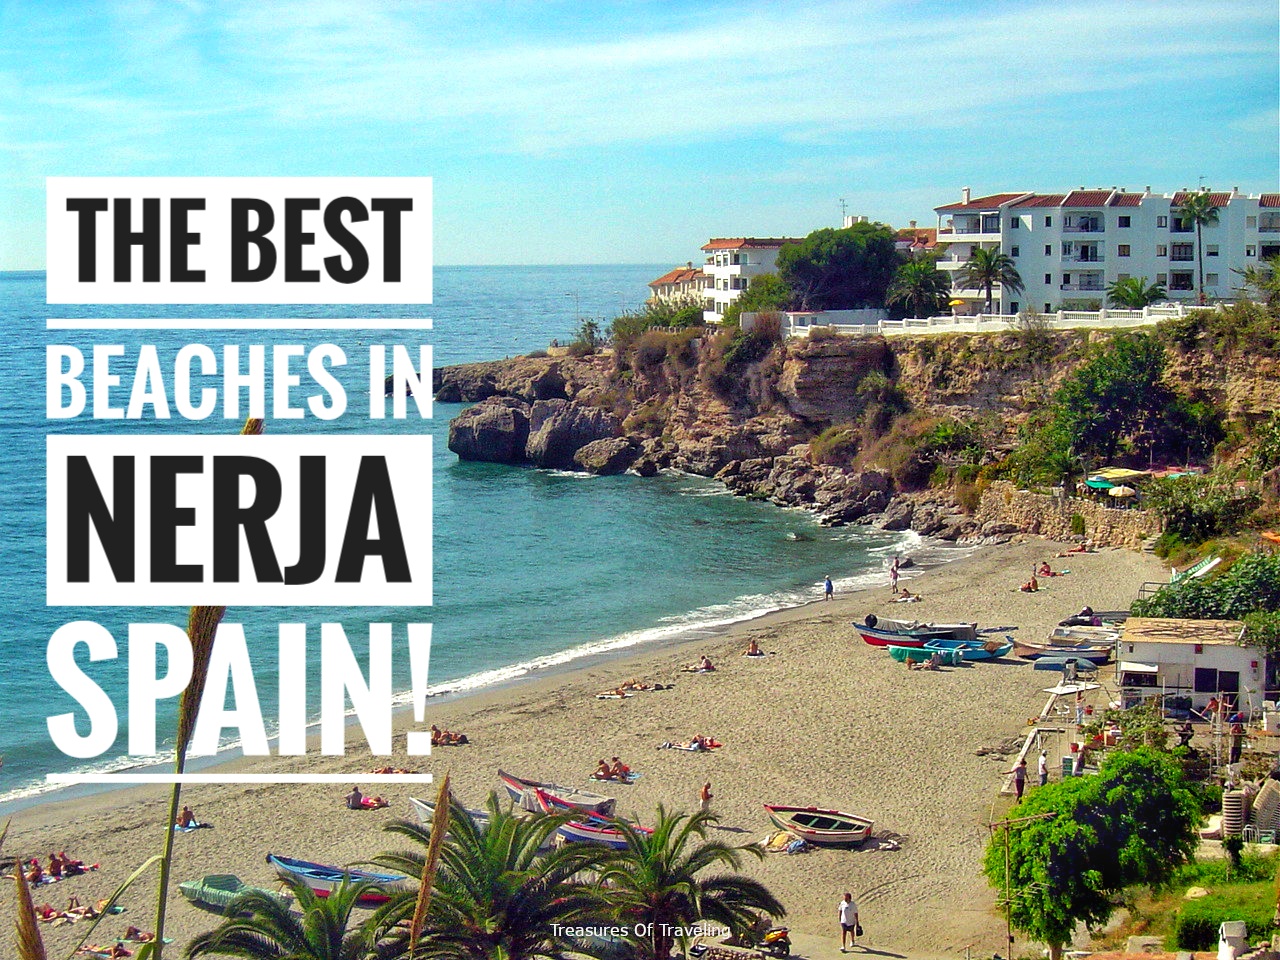 Nerja is well known throughout #Spain for its famous beaches, coves and cliffs along the vibrant #Mediterranean #CostaDelSol. The majority of people who visit #Nerja come to vacation and relax on any and all of the best #beaches in Nerja.